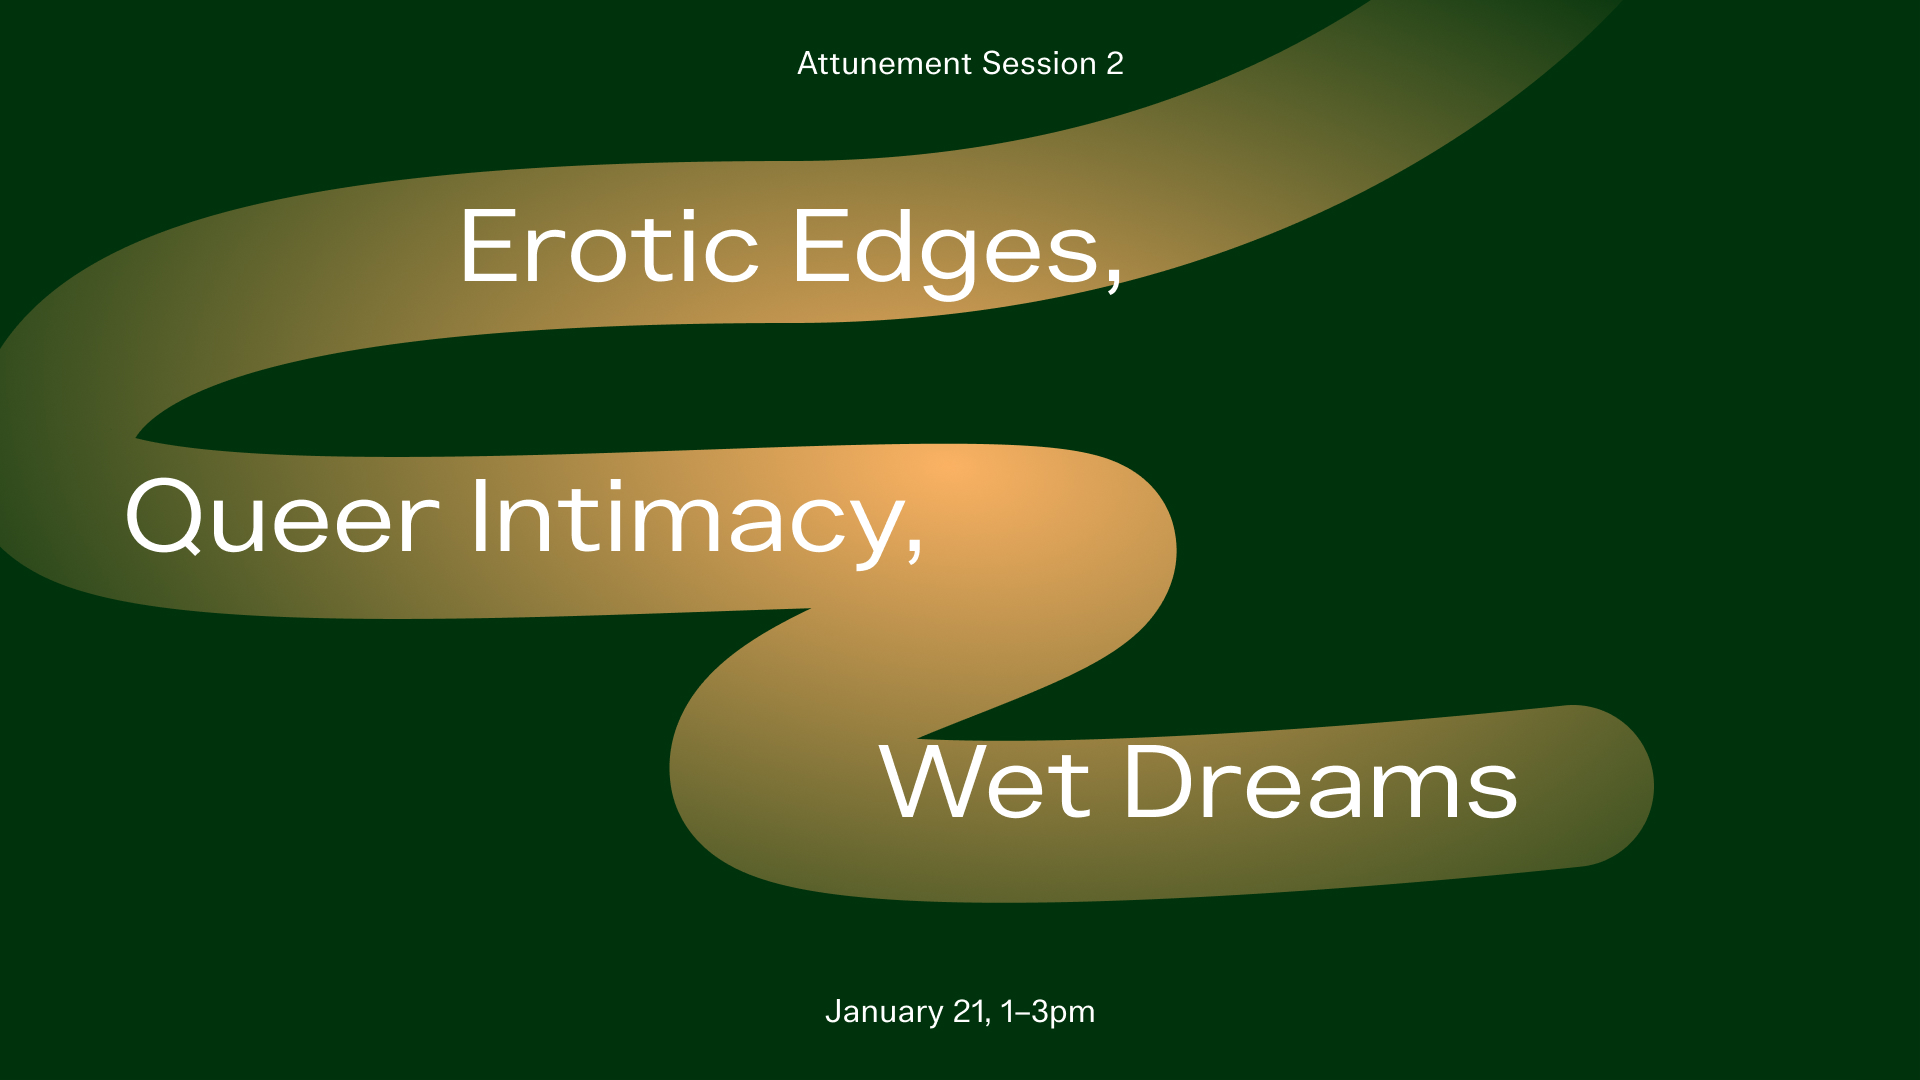 Text image with swirl: Attunement Session 2 Erotic Edges, Queer Intimacy, Wet Dreams